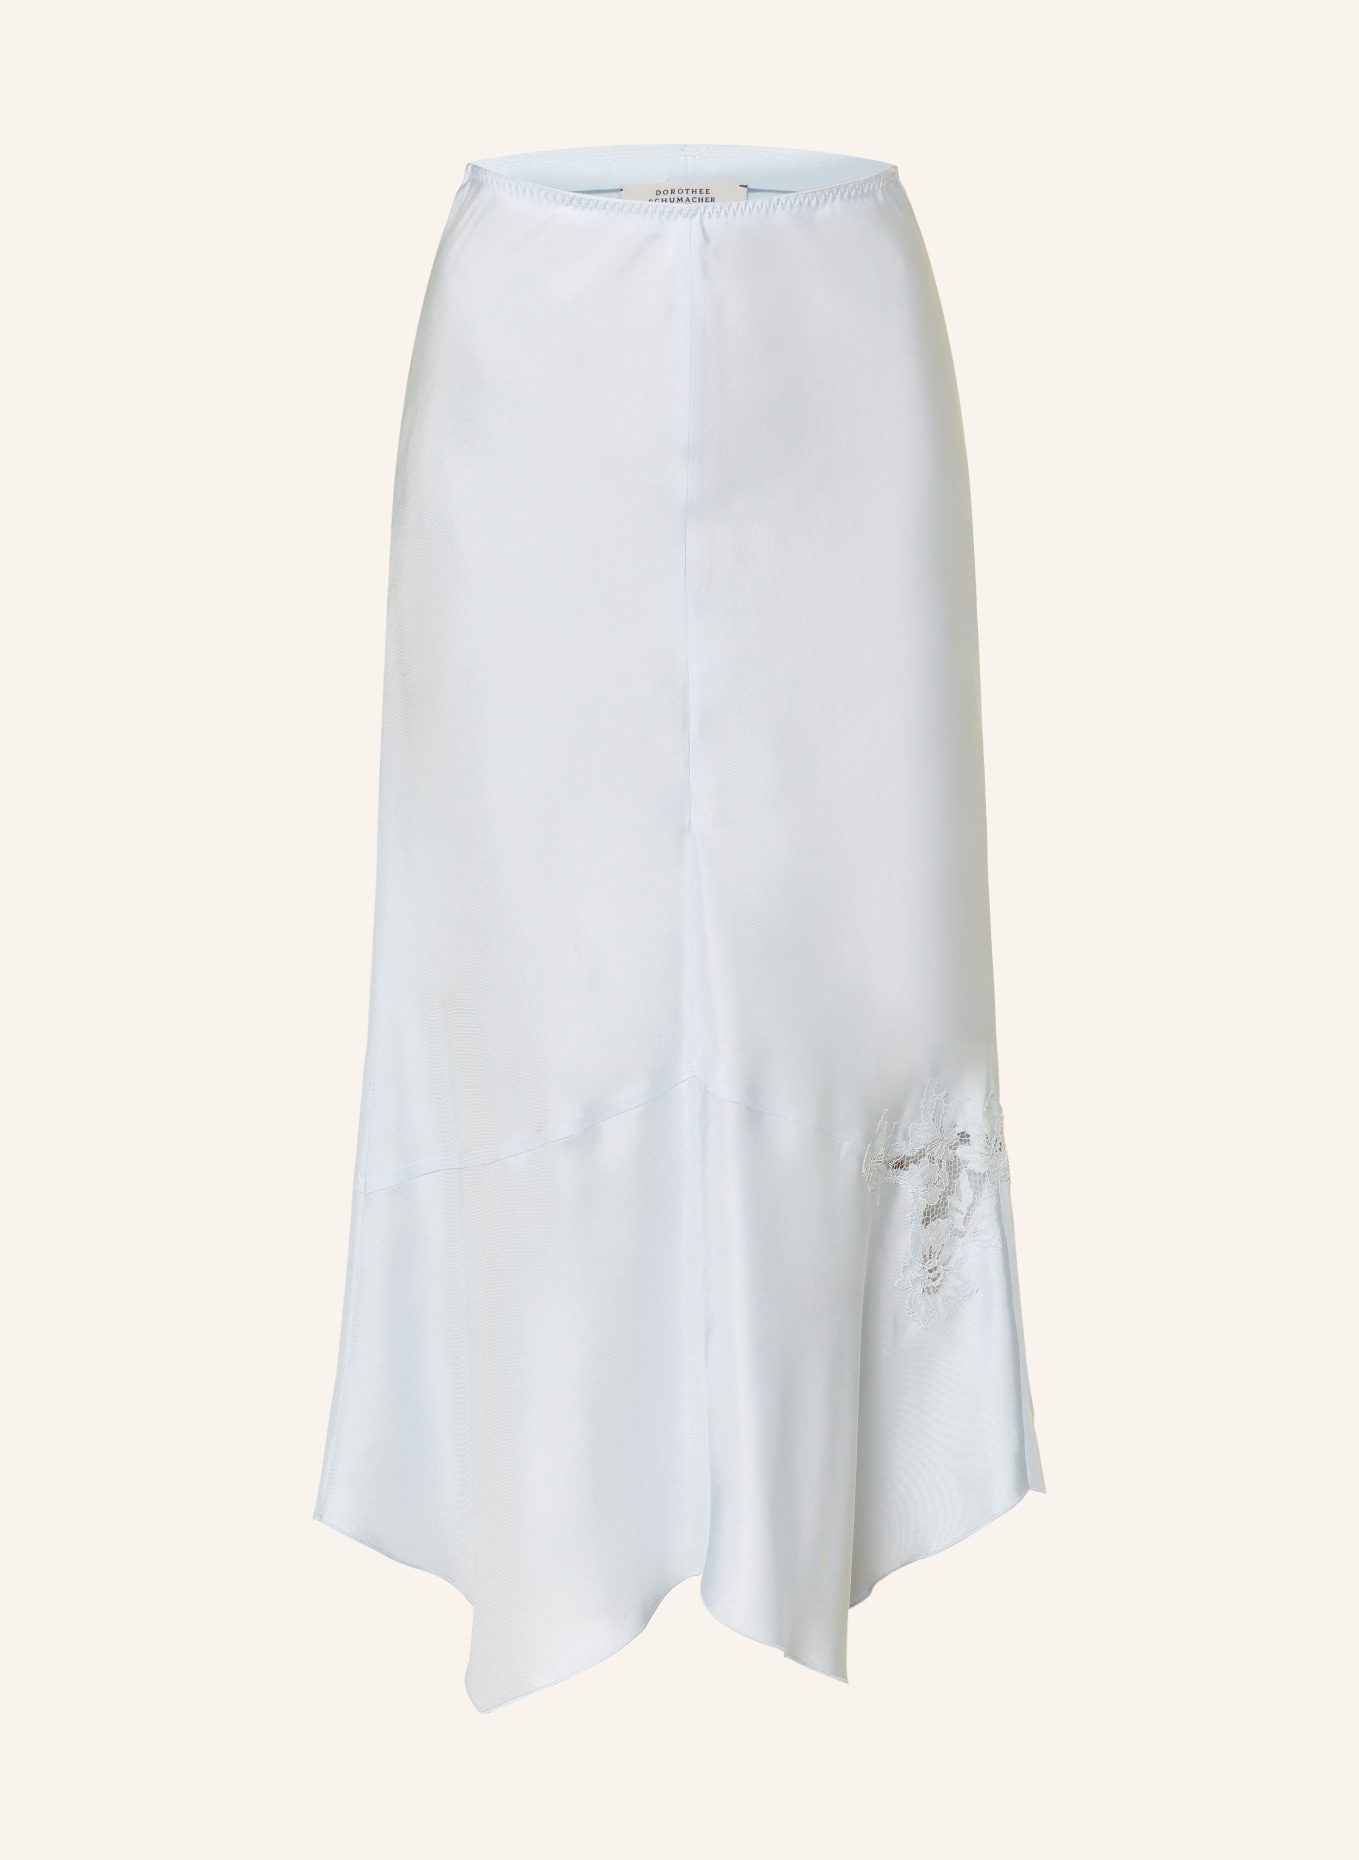 DOROTHEE SCHUMACHER Silk skirt SENSUAL COOLNESS with lace, Color: LIGHT BLUE (Image 1)